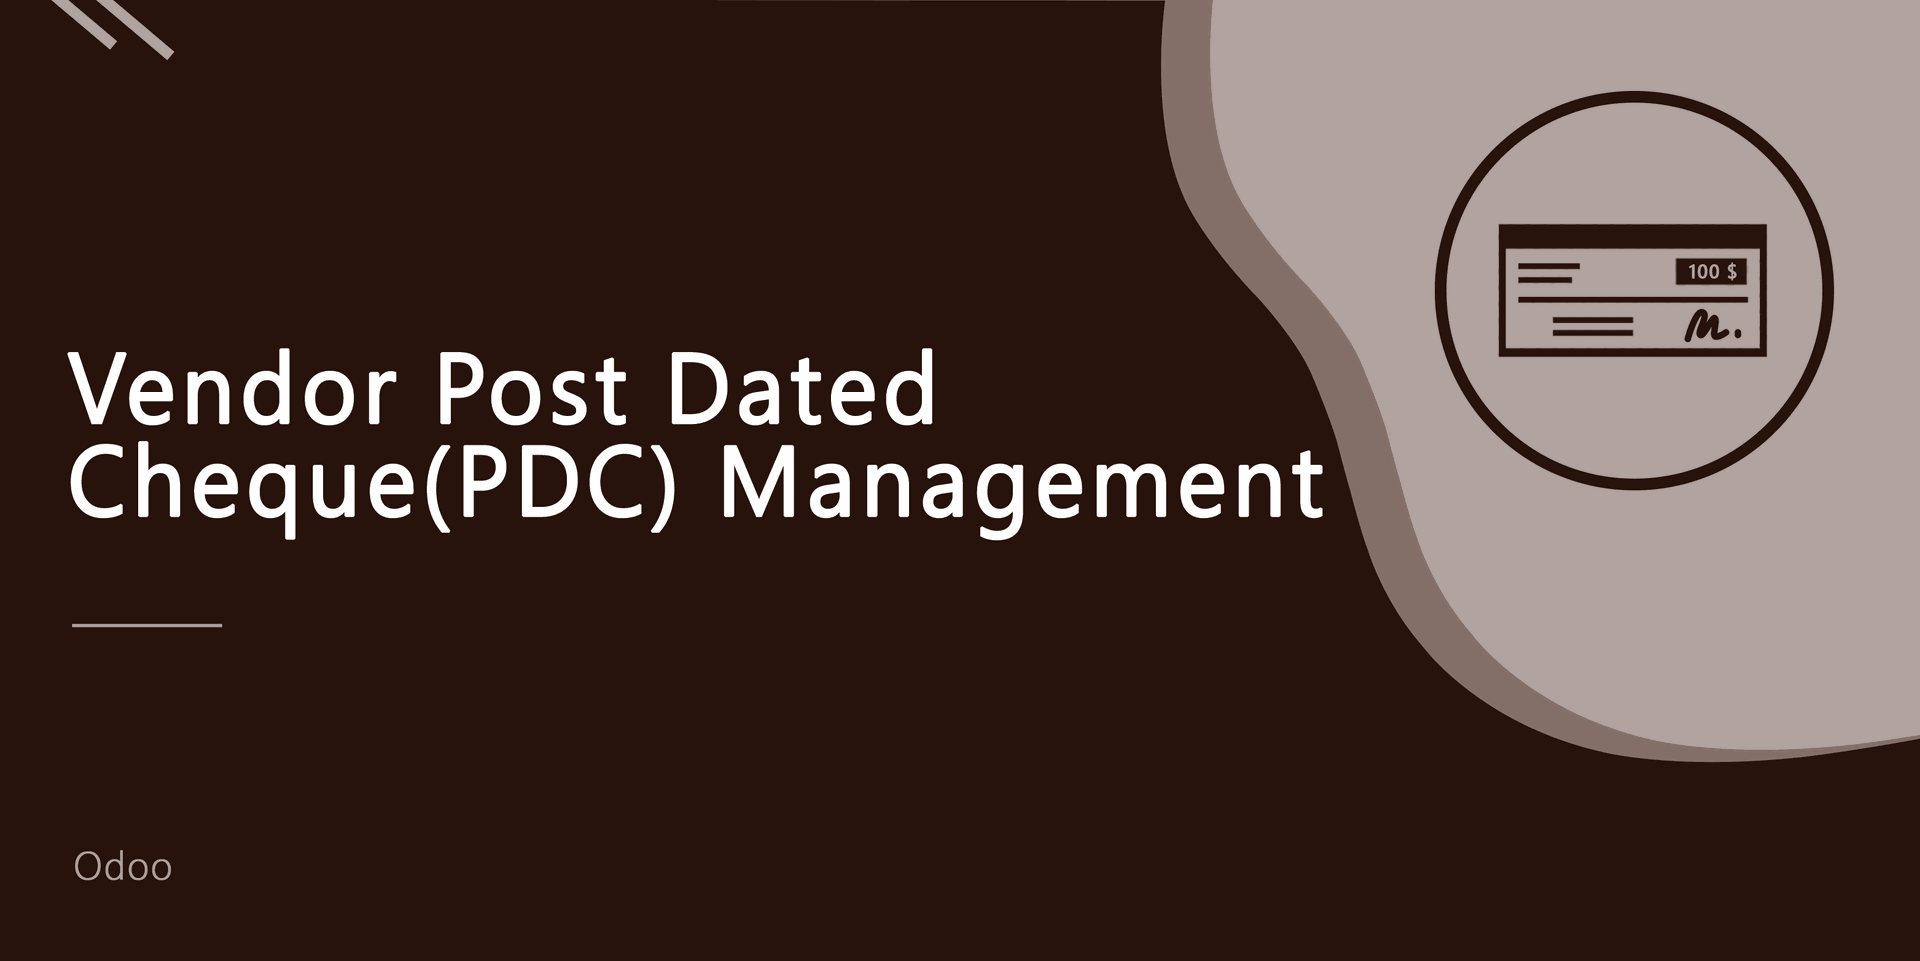 Vendor Post-Dated Cheque (PDC) Management
